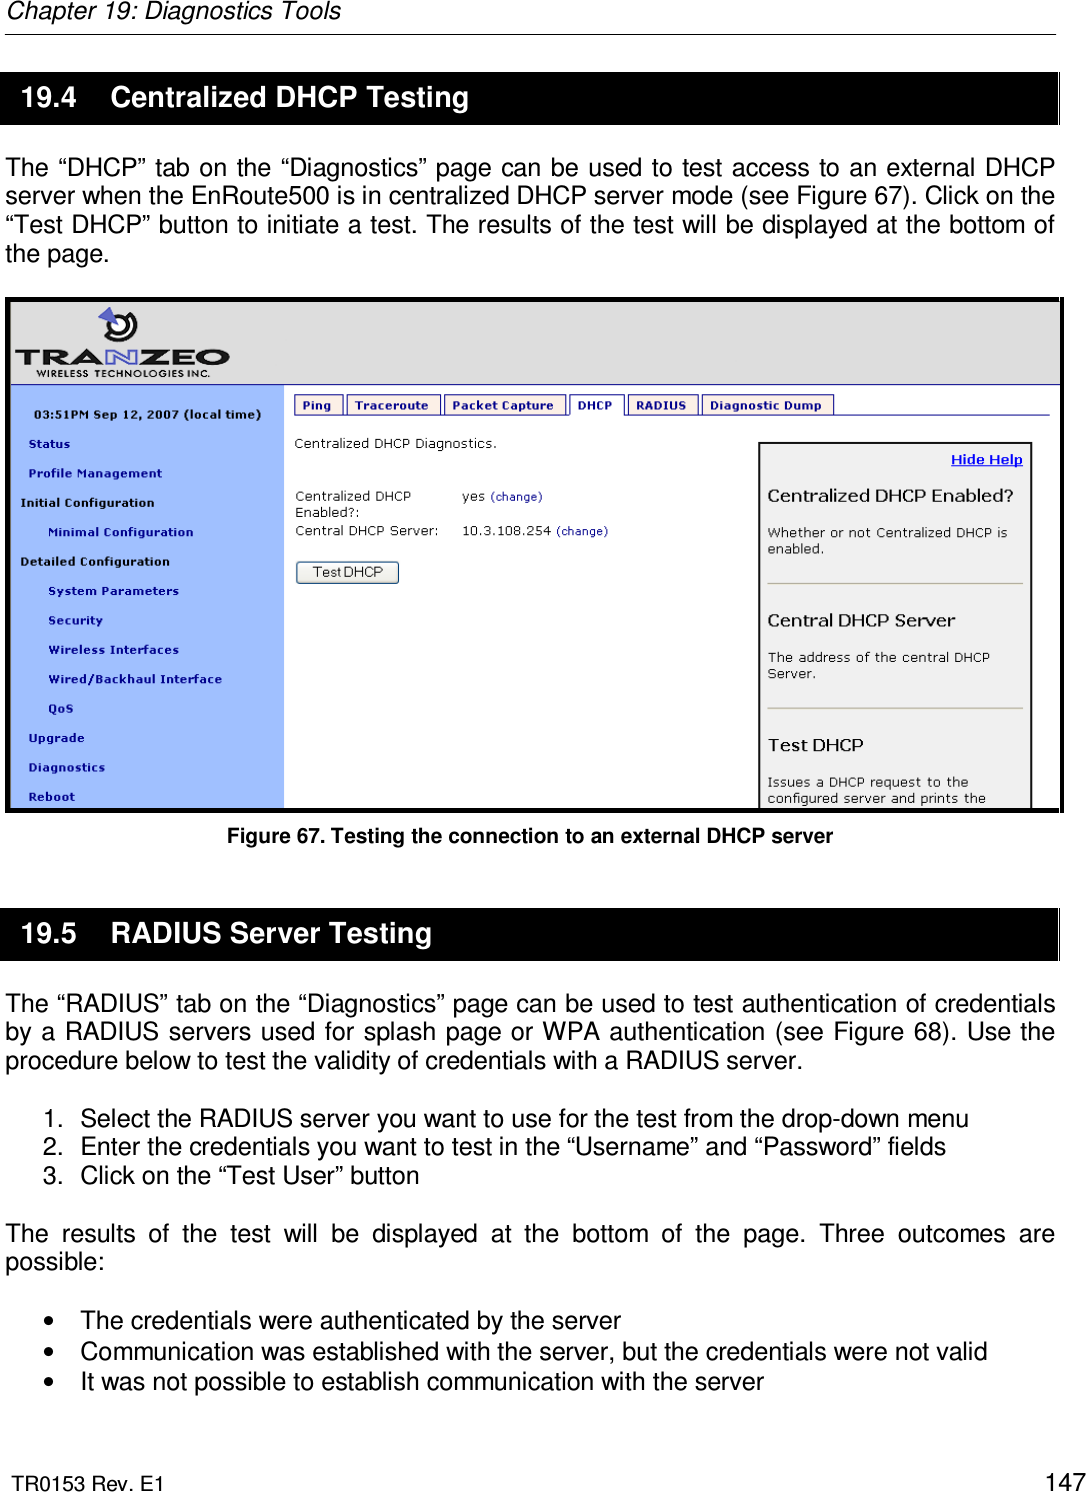 Chapter 19: Diagnostics Tools  TR0153 Rev. E1    147 19.4  Centralized DHCP Testing The “DHCP” tab on the “Diagnostics” page can be used to test access to an external DHCP server when the EnRoute500 is in centralized DHCP server mode (see Figure 67). Click on the “Test DHCP” button to initiate a test. The results of the test will be displayed at the bottom of the page.   Figure 67. Testing the connection to an external DHCP server 19.5  RADIUS Server Testing The “RADIUS” tab on the “Diagnostics” page can be used to test authentication of credentials by a RADIUS servers used for splash page or WPA authentication (see Figure 68). Use the procedure below to test the validity of credentials with a RADIUS server.  1.  Select the RADIUS server you want to use for the test from the drop-down menu 2.  Enter the credentials you want to test in the “Username” and “Password” fields 3.  Click on the “Test User” button   The  results  of  the  test  will  be  displayed  at  the  bottom  of  the  page.  Three  outcomes  are possible:  •  The credentials were authenticated by the server •  Communication was established with the server, but the credentials were not valid •  It was not possible to establish communication with the server 